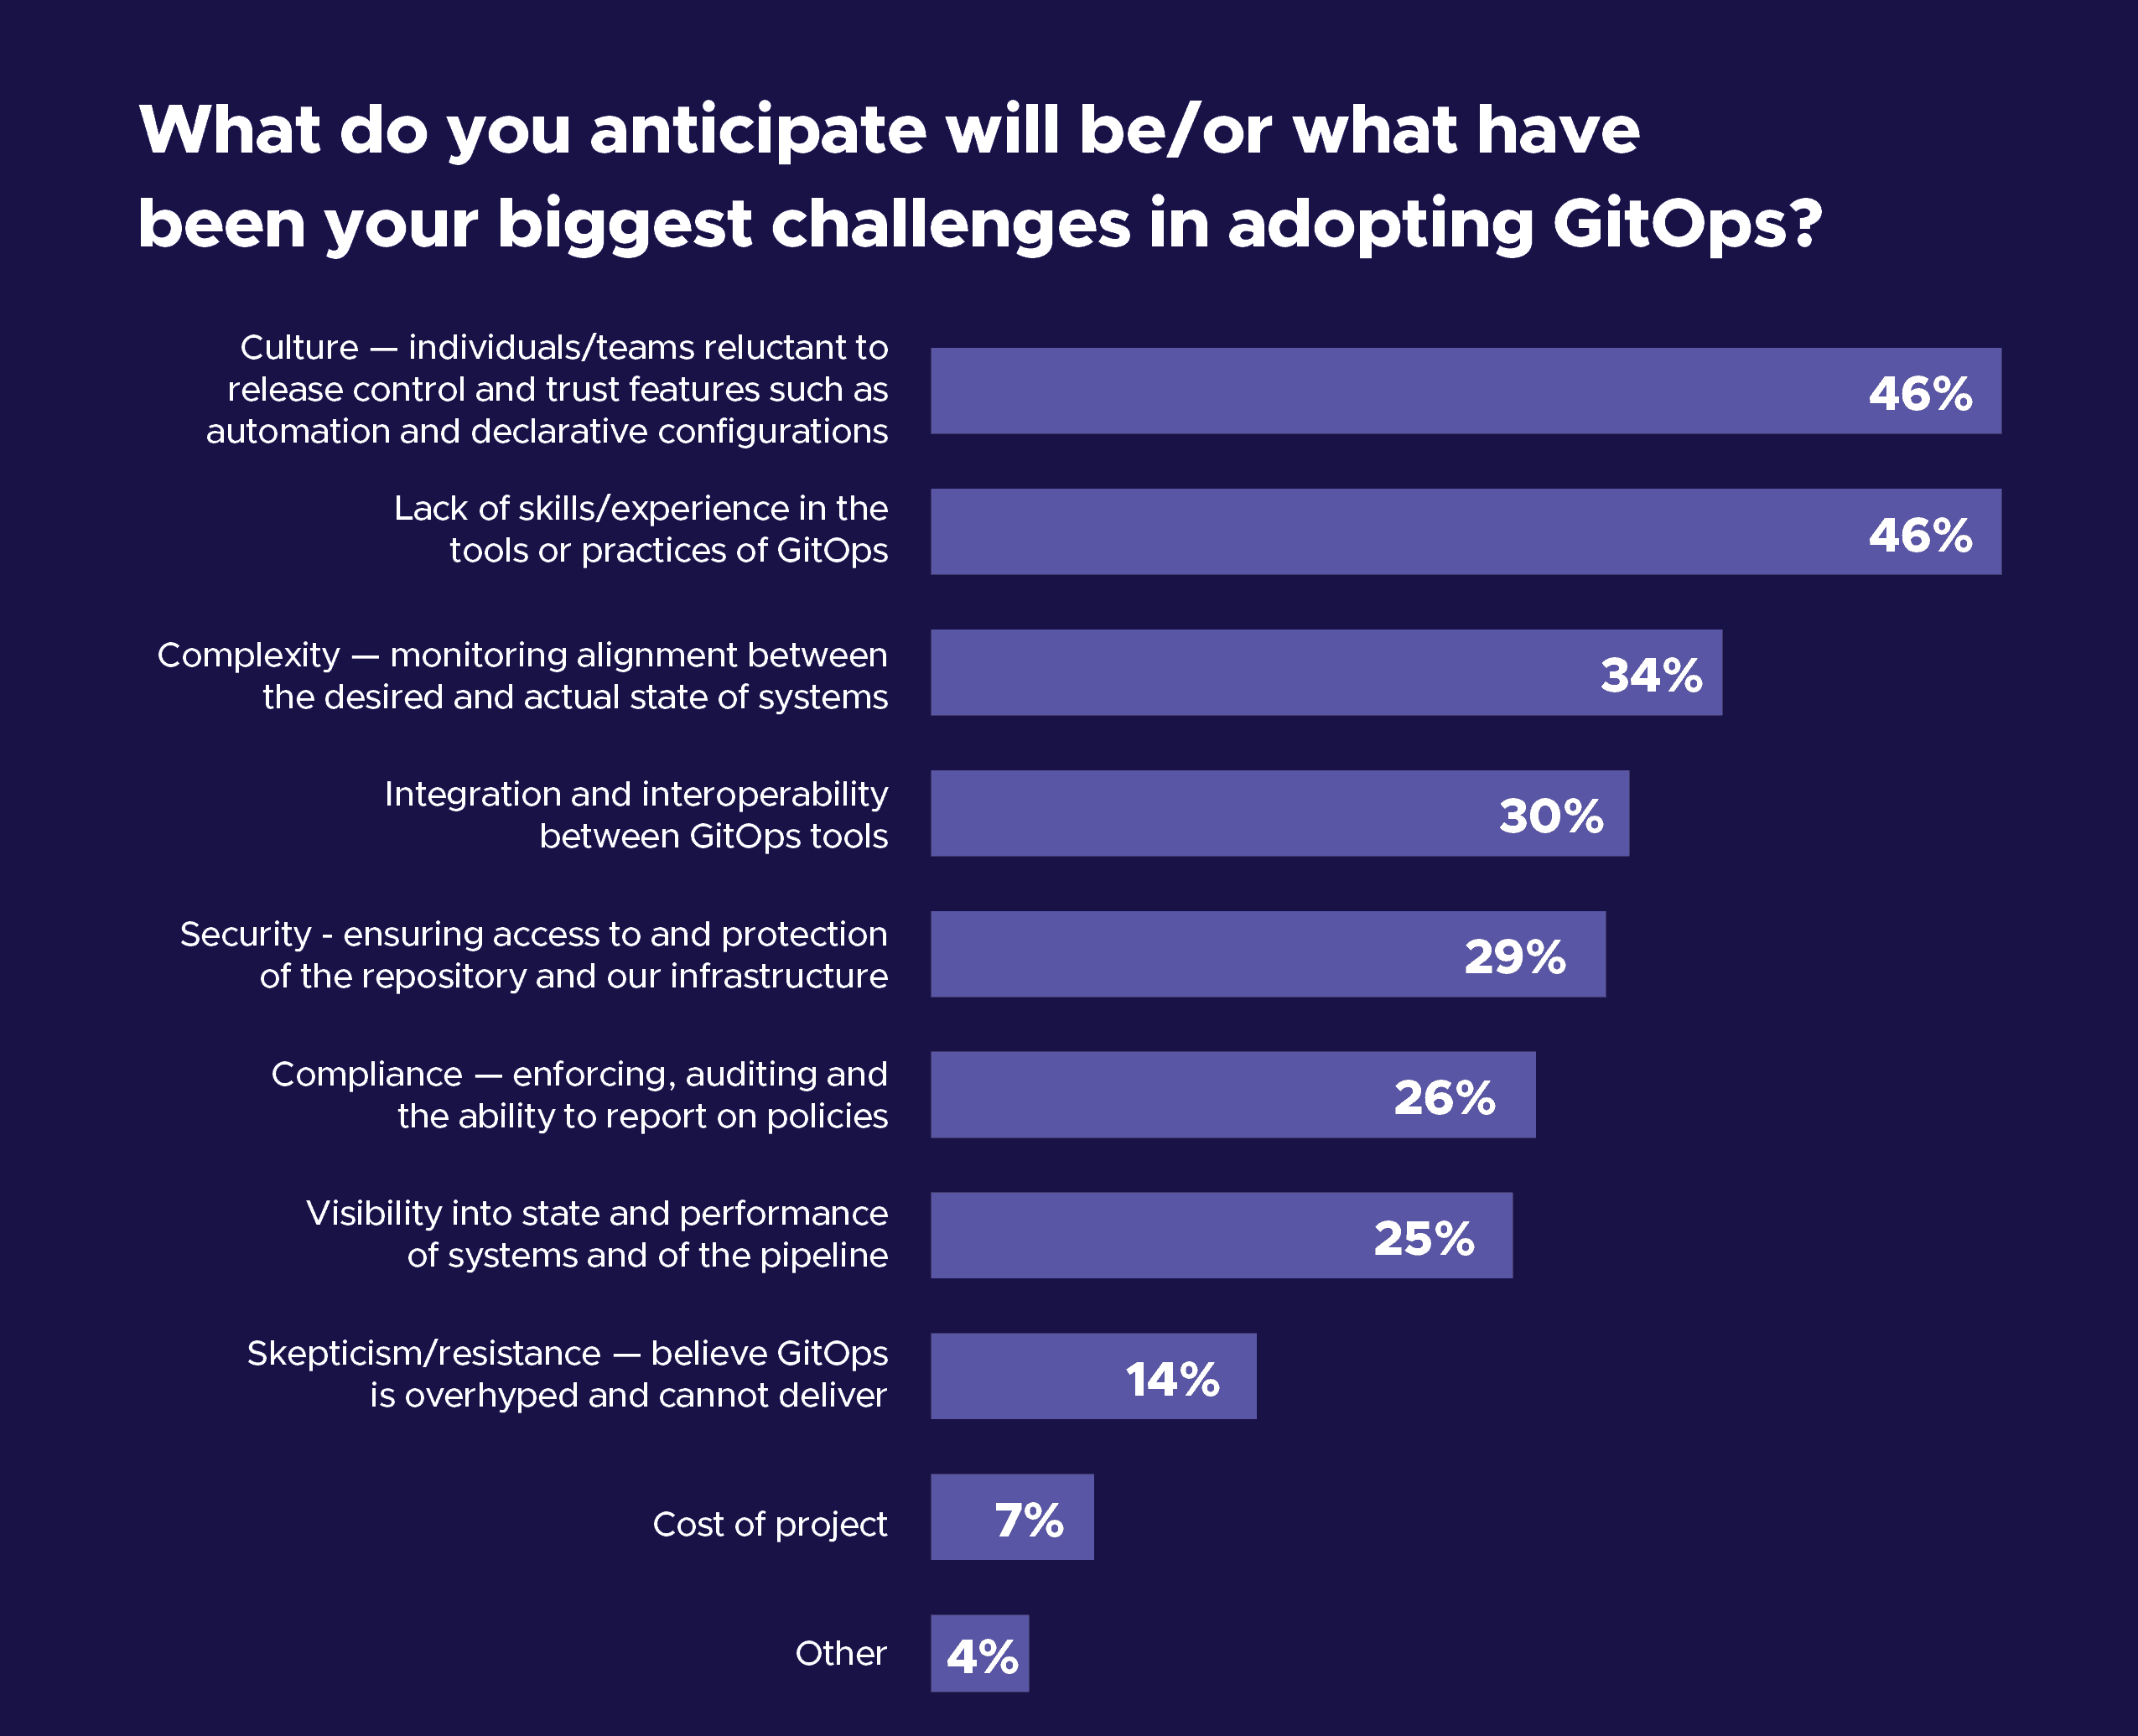 Bar chart showing respondent's respond towards question "What do you anticipate will be/or what have been your biggest challenges in adopting GitOps?" 46% chose "culture - individuals/teams reluctant to release control and trust features such as automation and declarative configurations" and "lack of skills/experience in the tools or practices of GitOps"